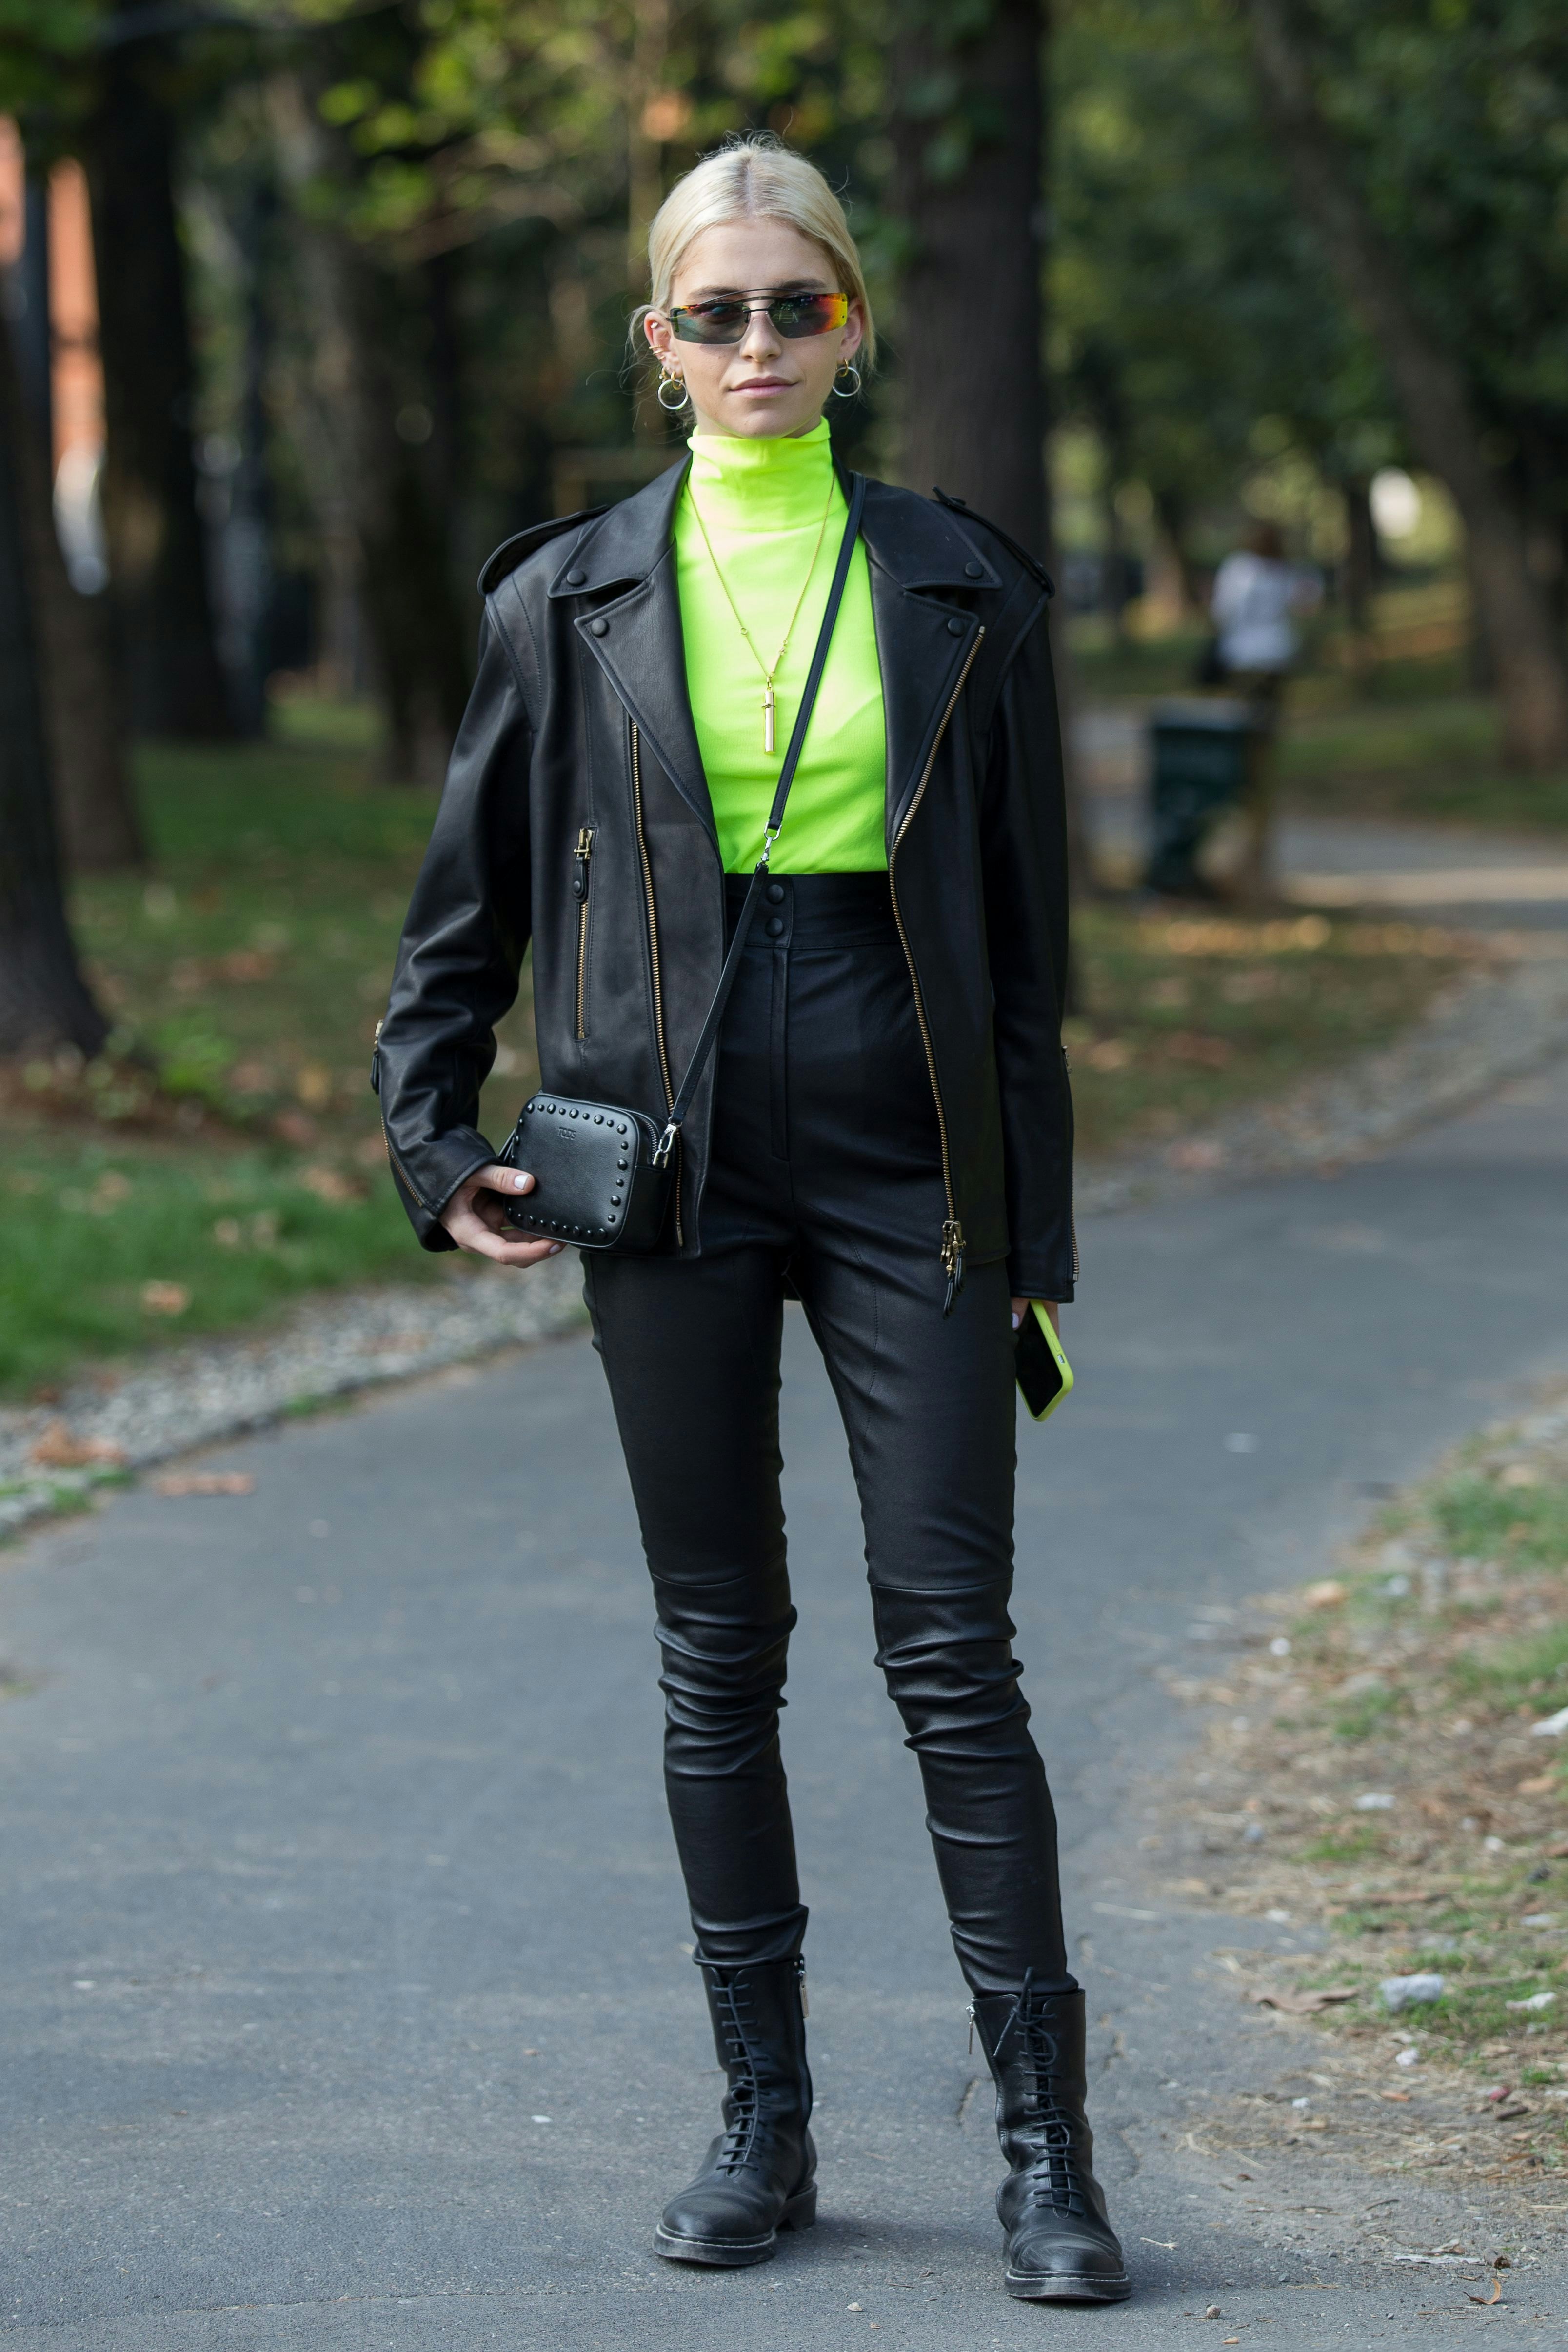 neon green shirt outfit